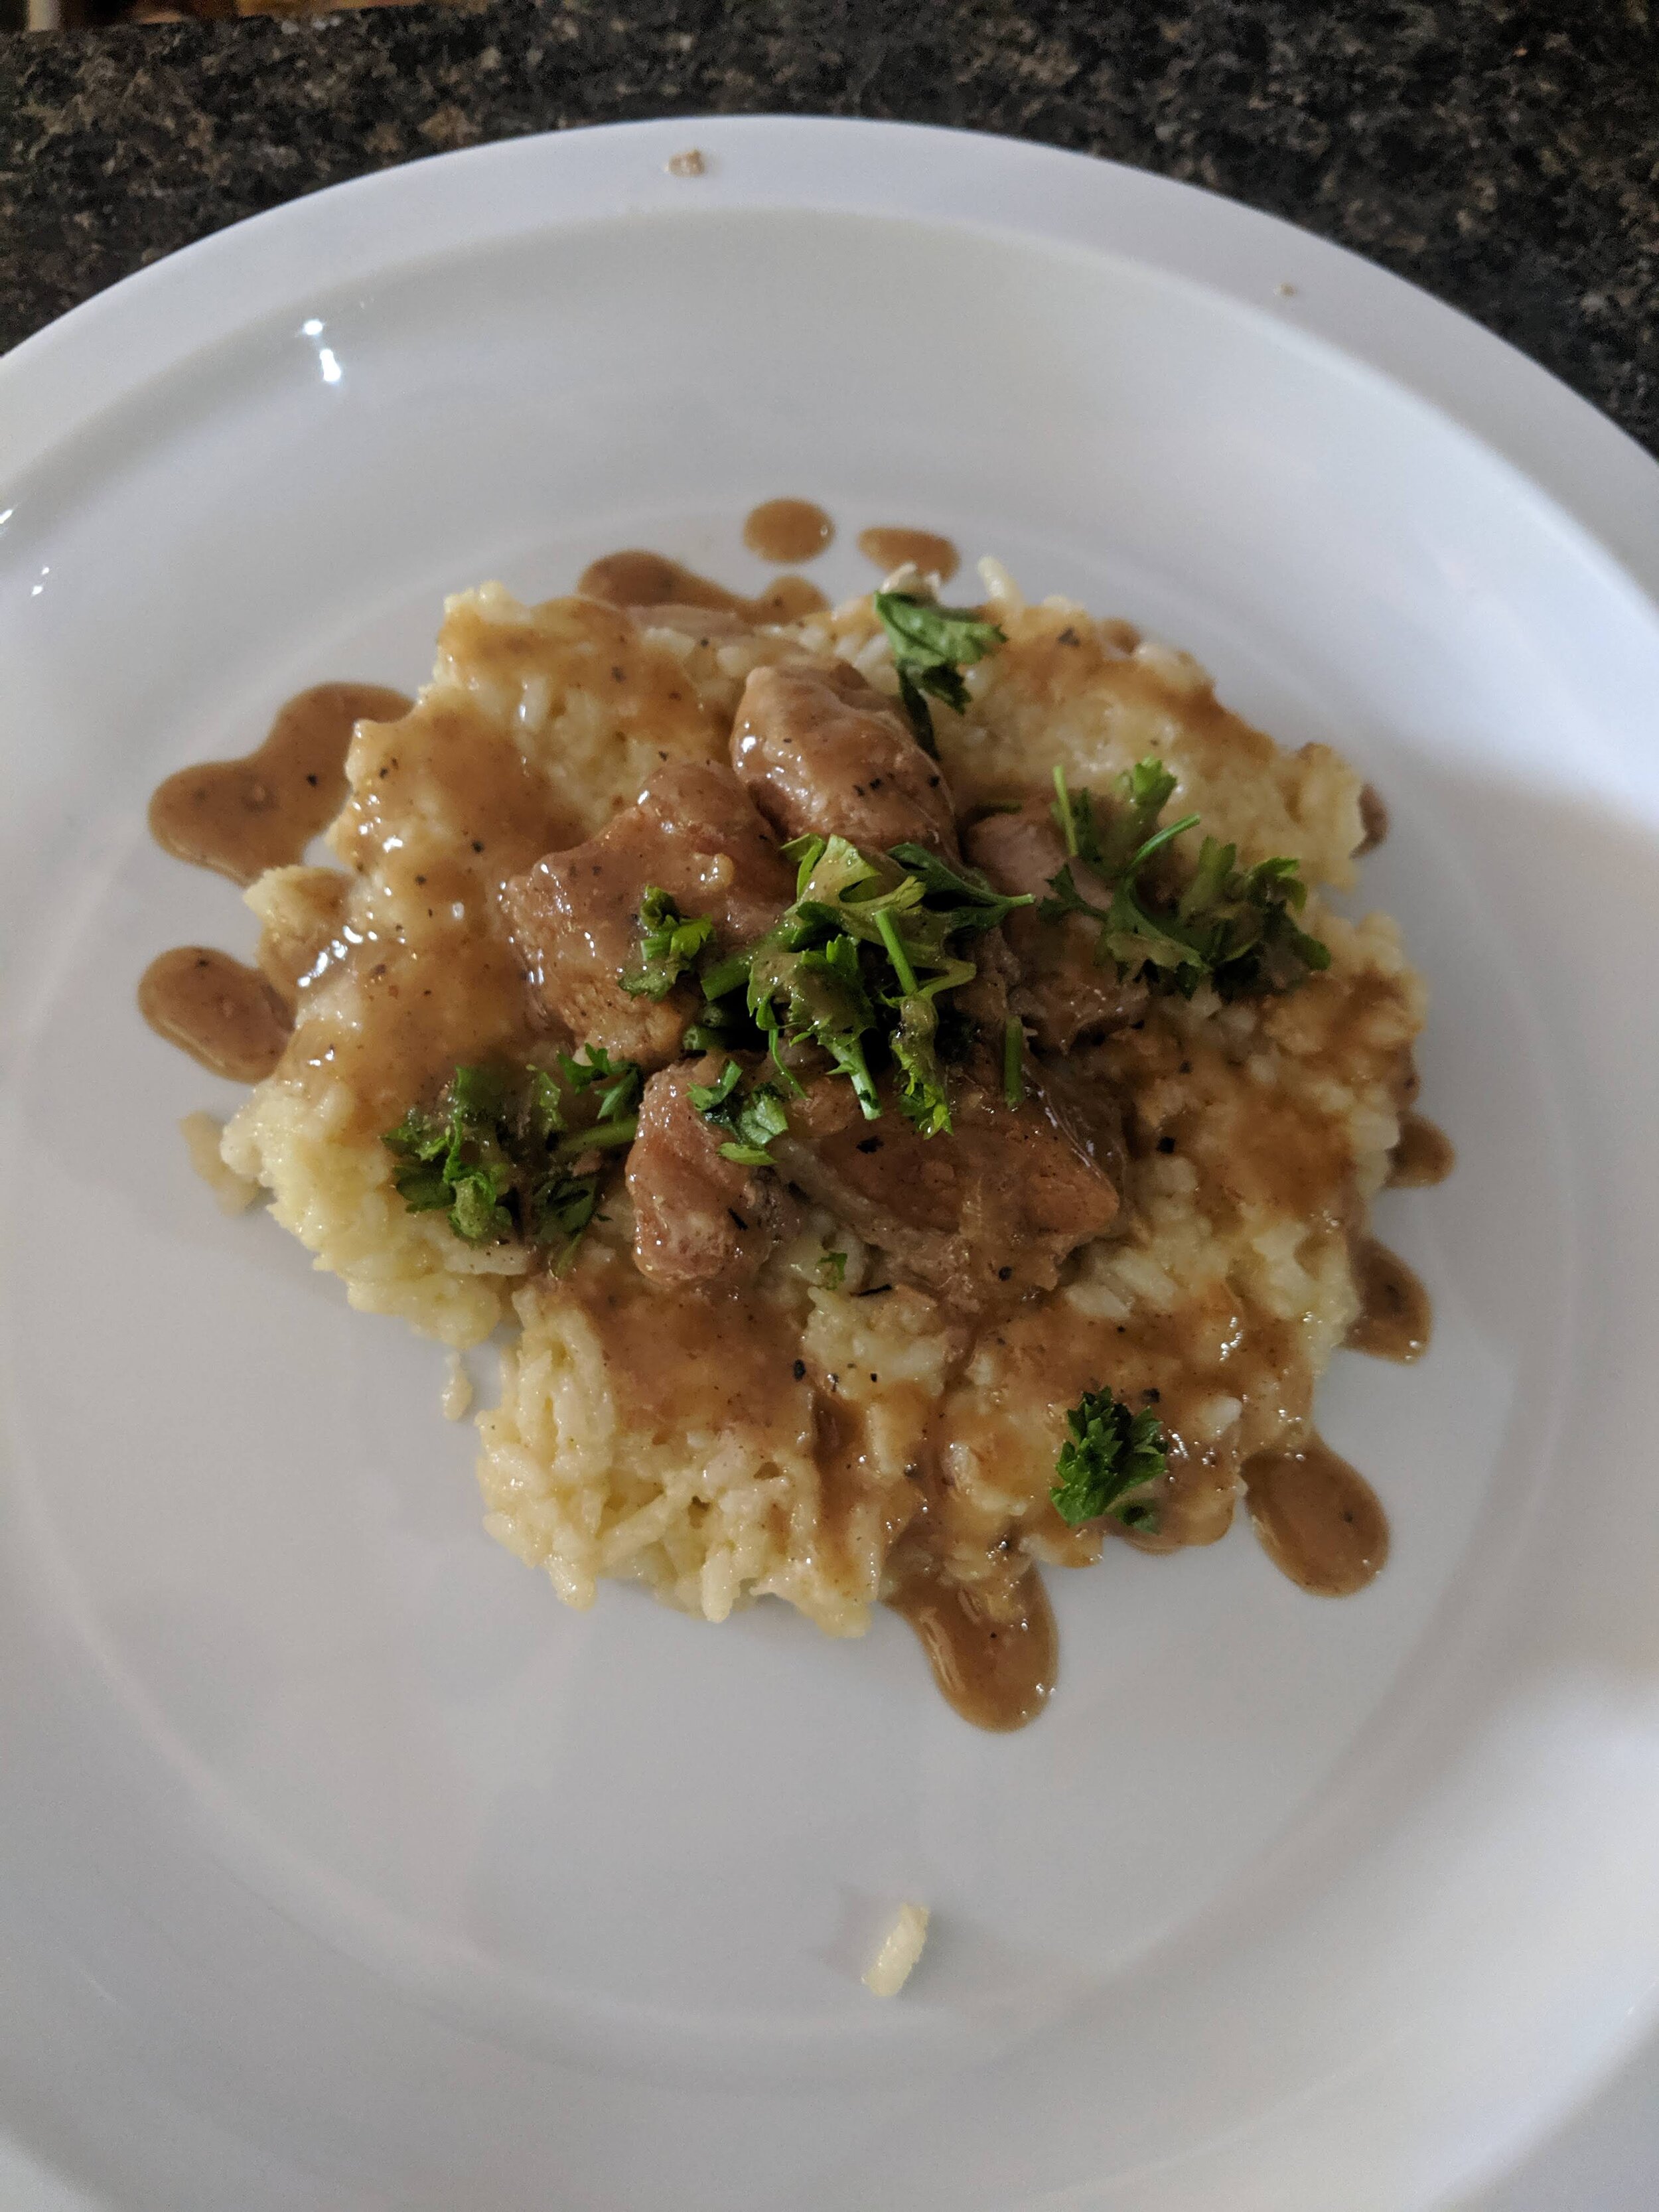  One day, Chef Kieran decided to spend 6 hours making slow-cooked pork belly over risotto. We were blown away. 